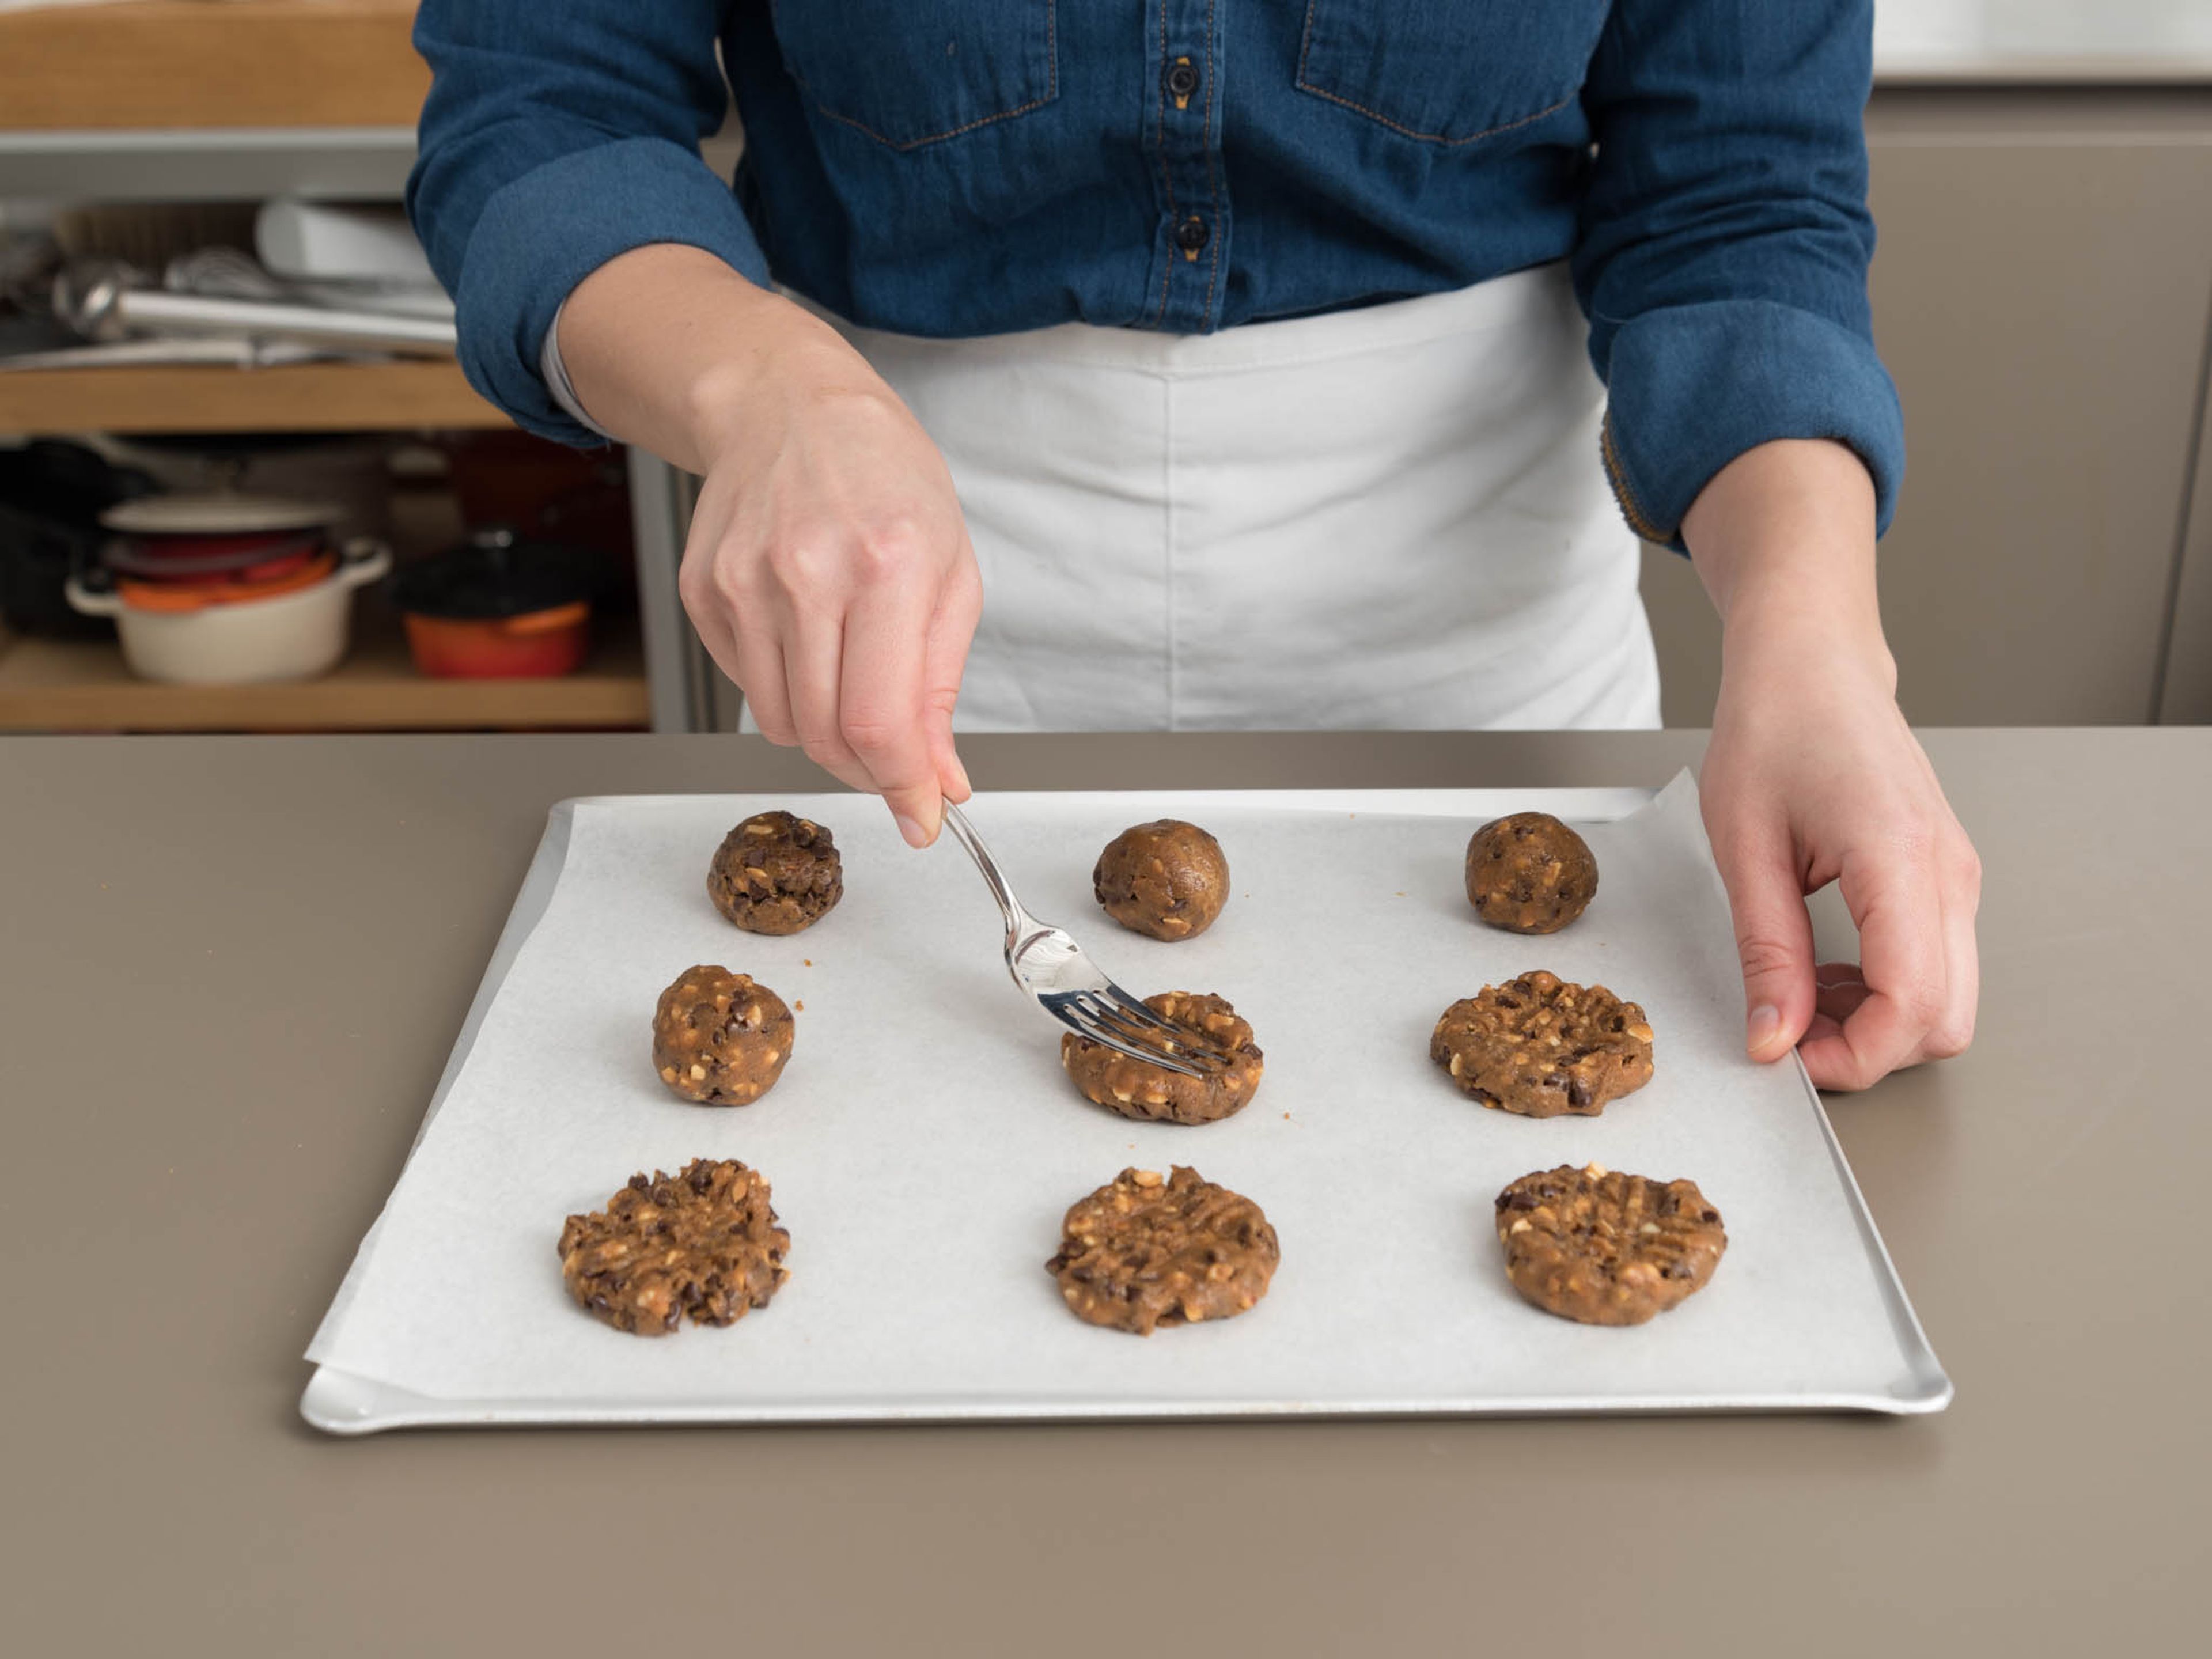 Scoop dough into equal-sized balls and place on parchment paper-lined baking sheets, spacing balls about 5 cm/2 in. apart. Use fork tines to flatten and make crisscross marks on cookies. Sprinkle with flaky sea salt, if desired.